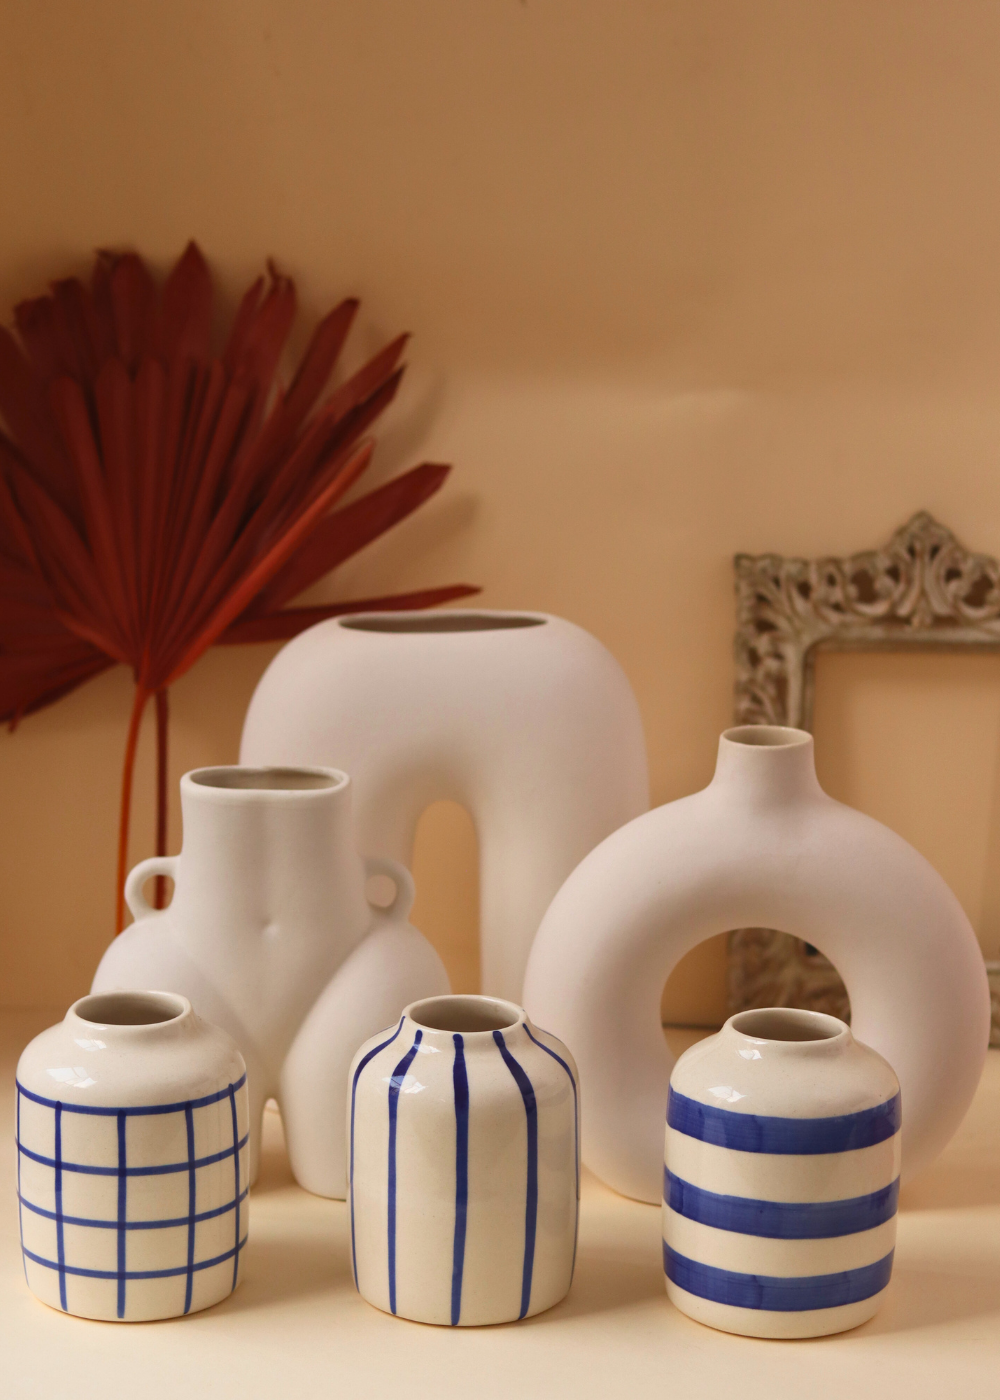 essential vases with white & blue colors